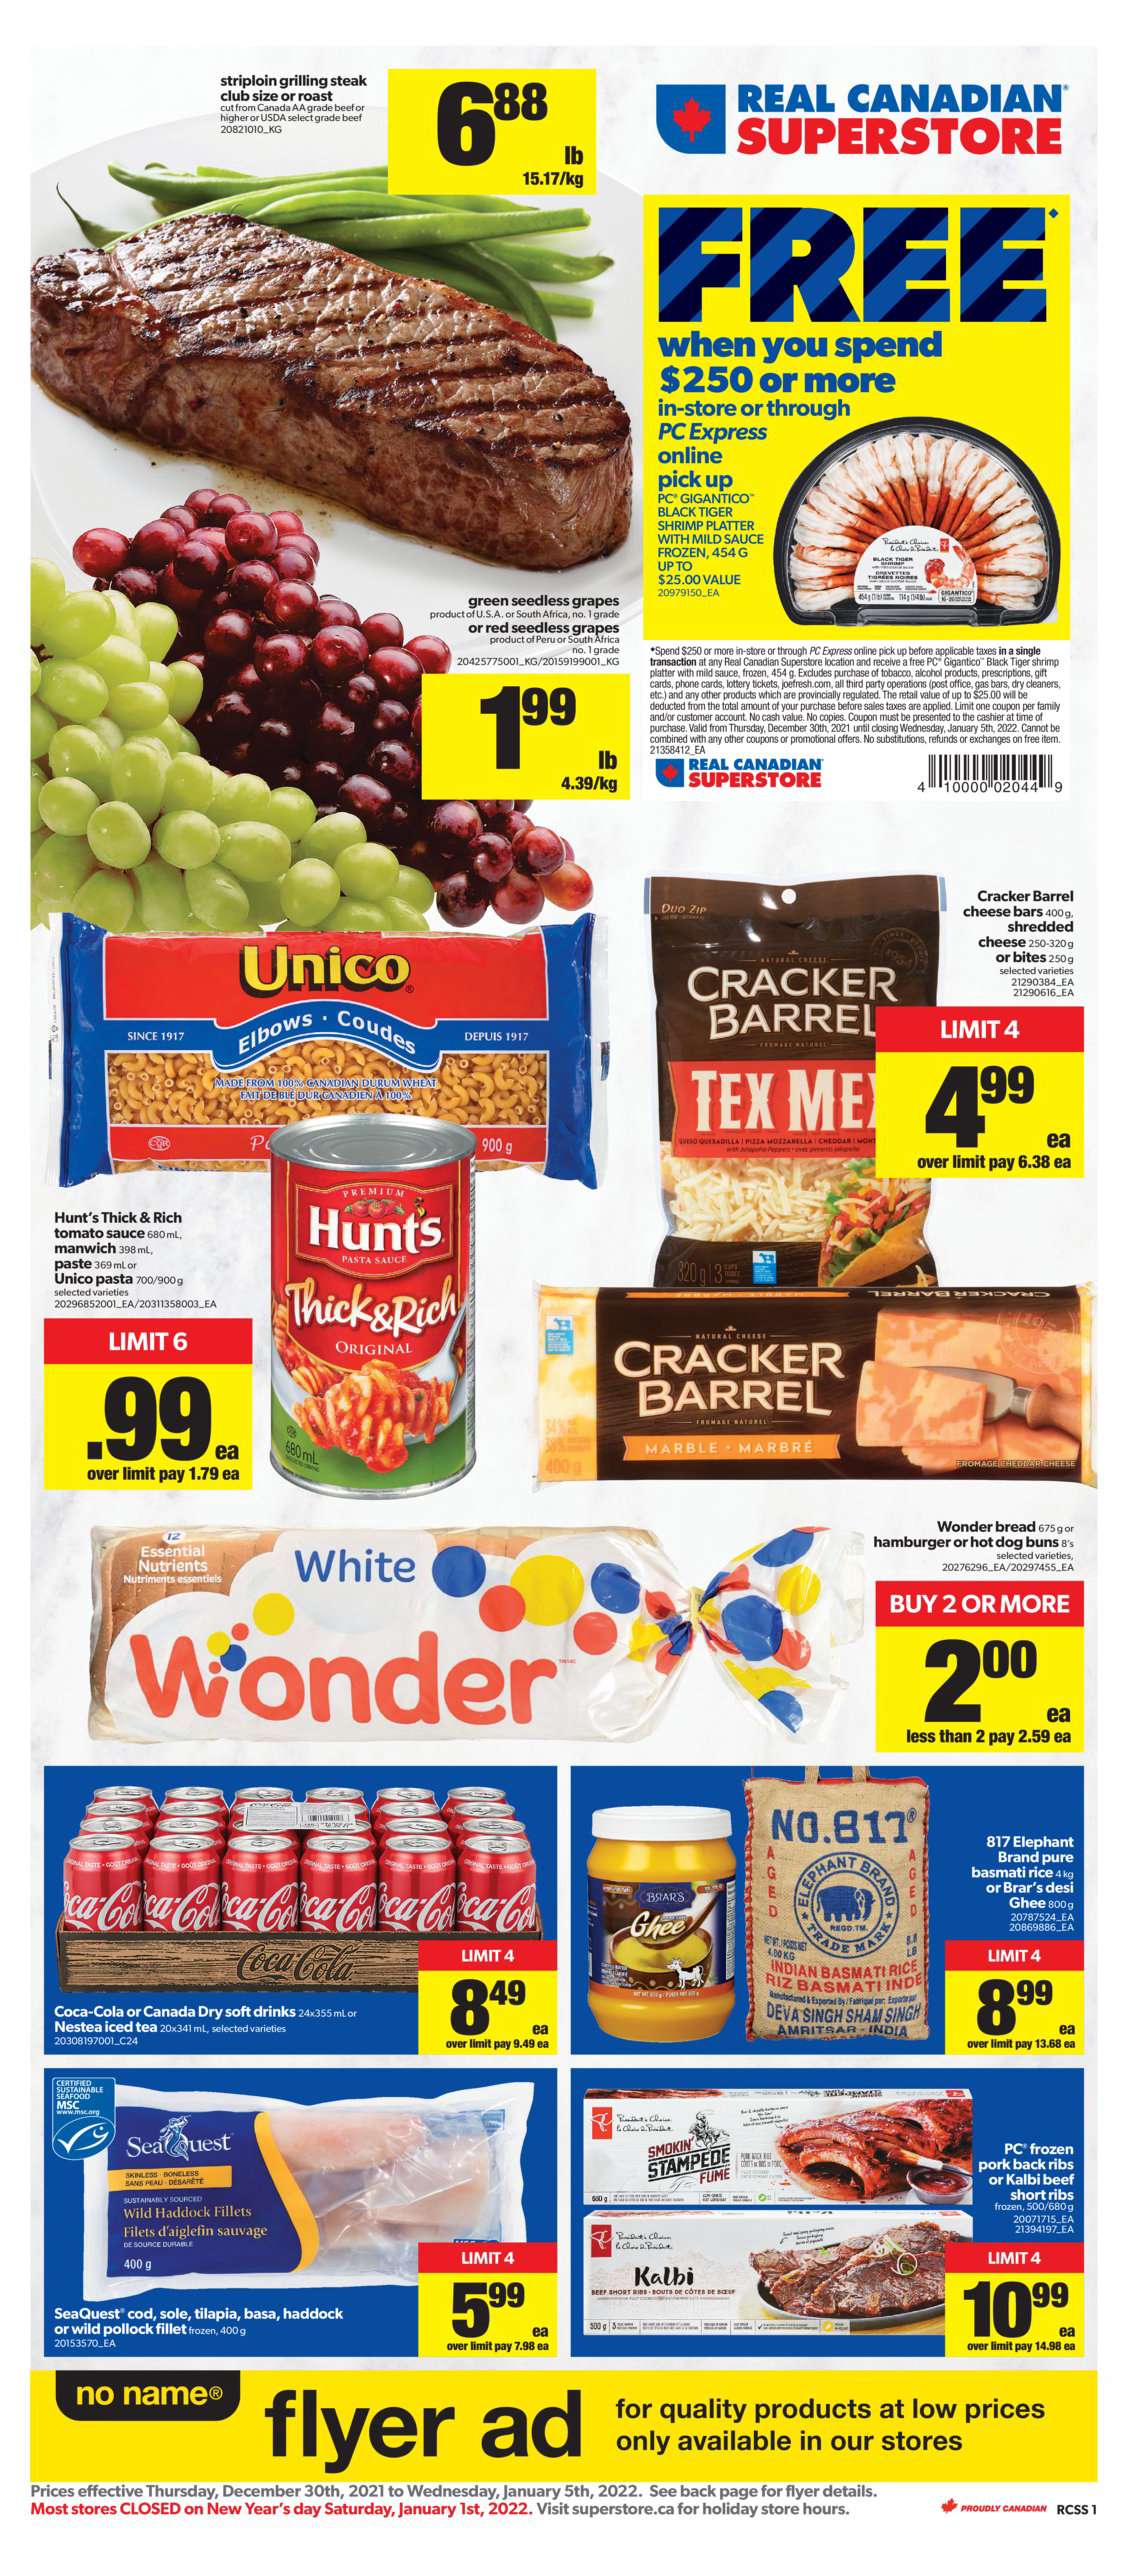 Real Canadian Superstore Flyer (ON) December 30 – January 5 2022